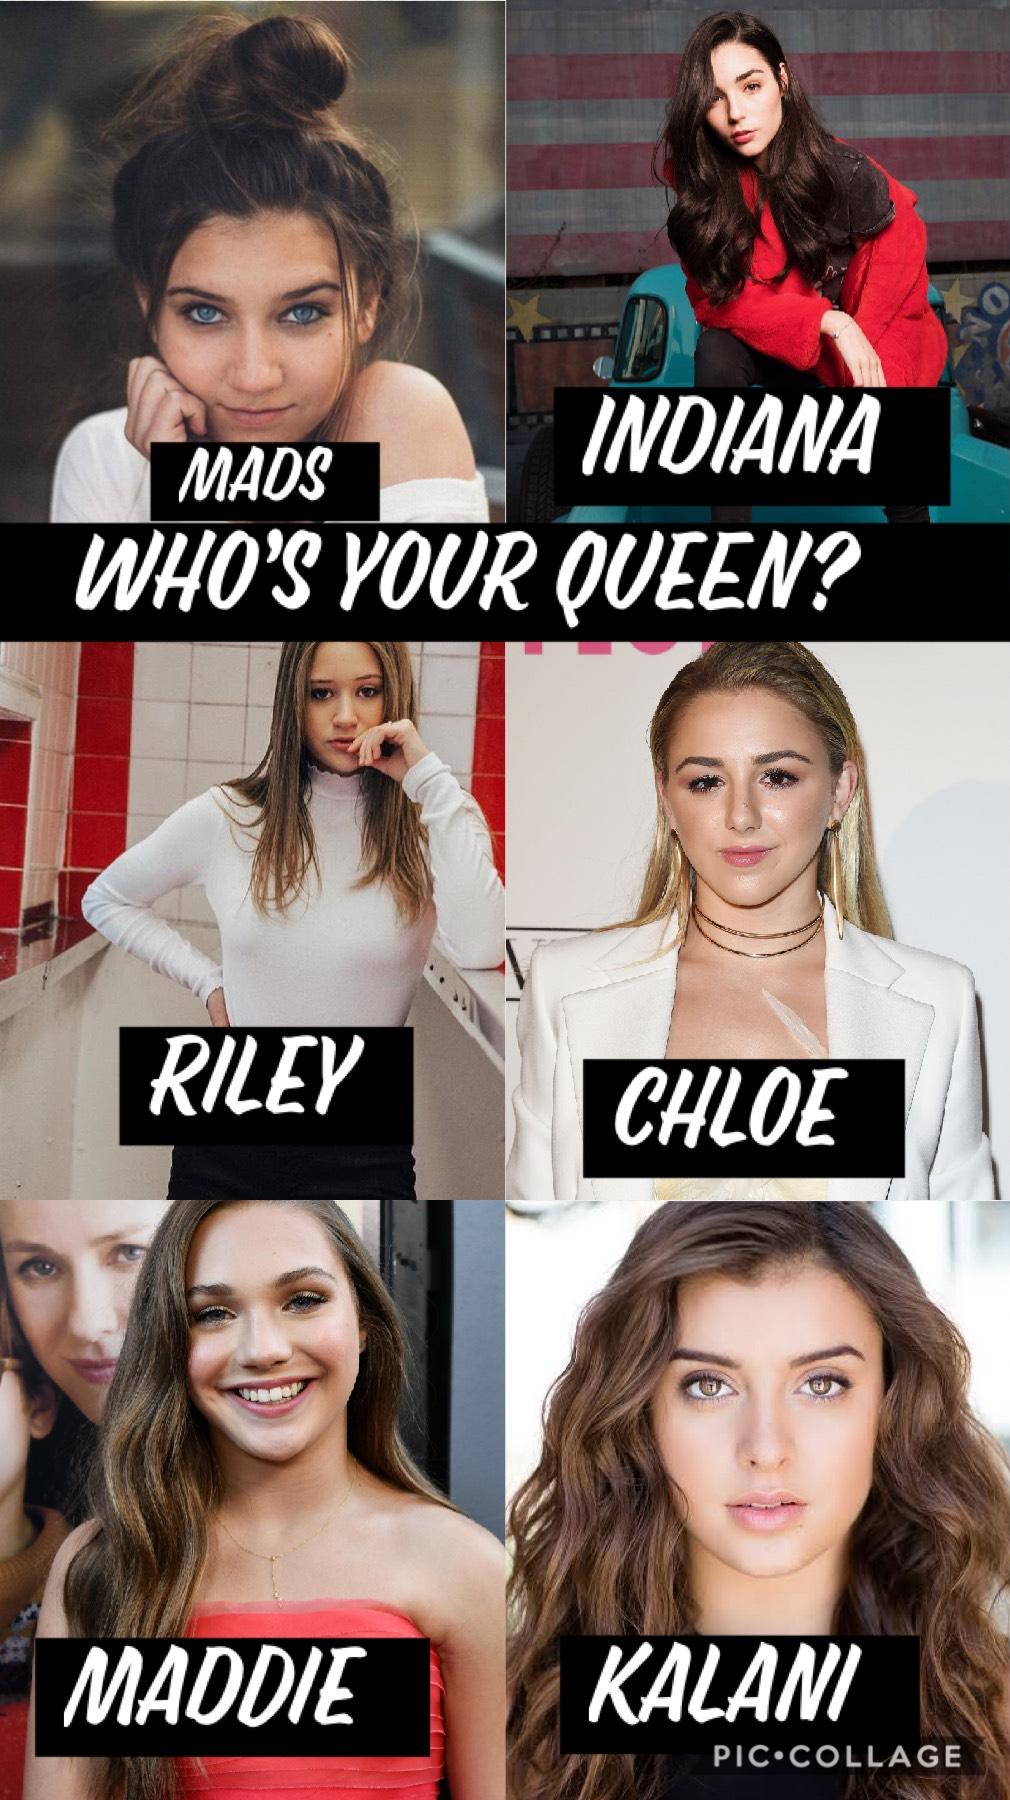 Click for my answer😊

KALANI ALWAYS AND WILL ALWAYS BE MY QUEEN🤩